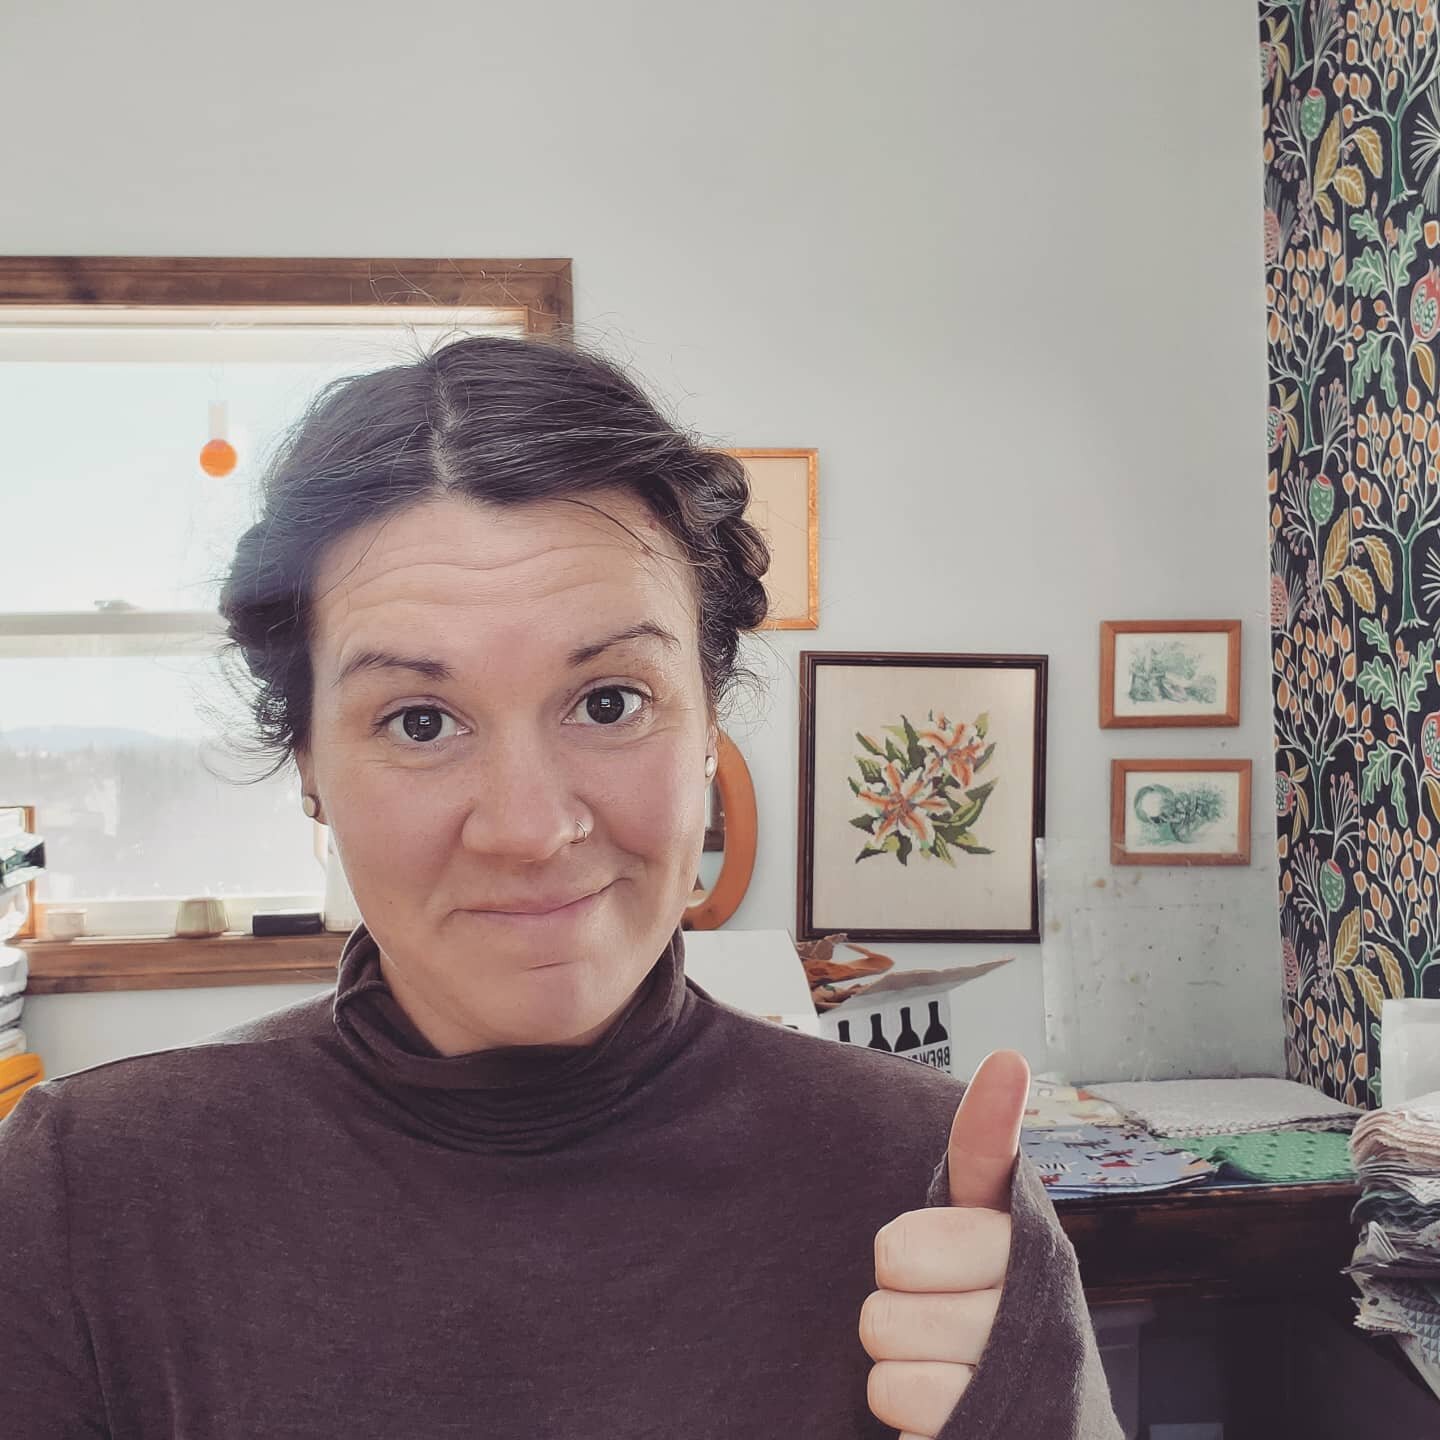 This is the face of a defeated but *eventually* optimistic small business owner that got all of their hard work deleted in an instant by hackers.

It's looking like the Bees Louise page on FB will not be accessed anymore,  and I'll have to start new.